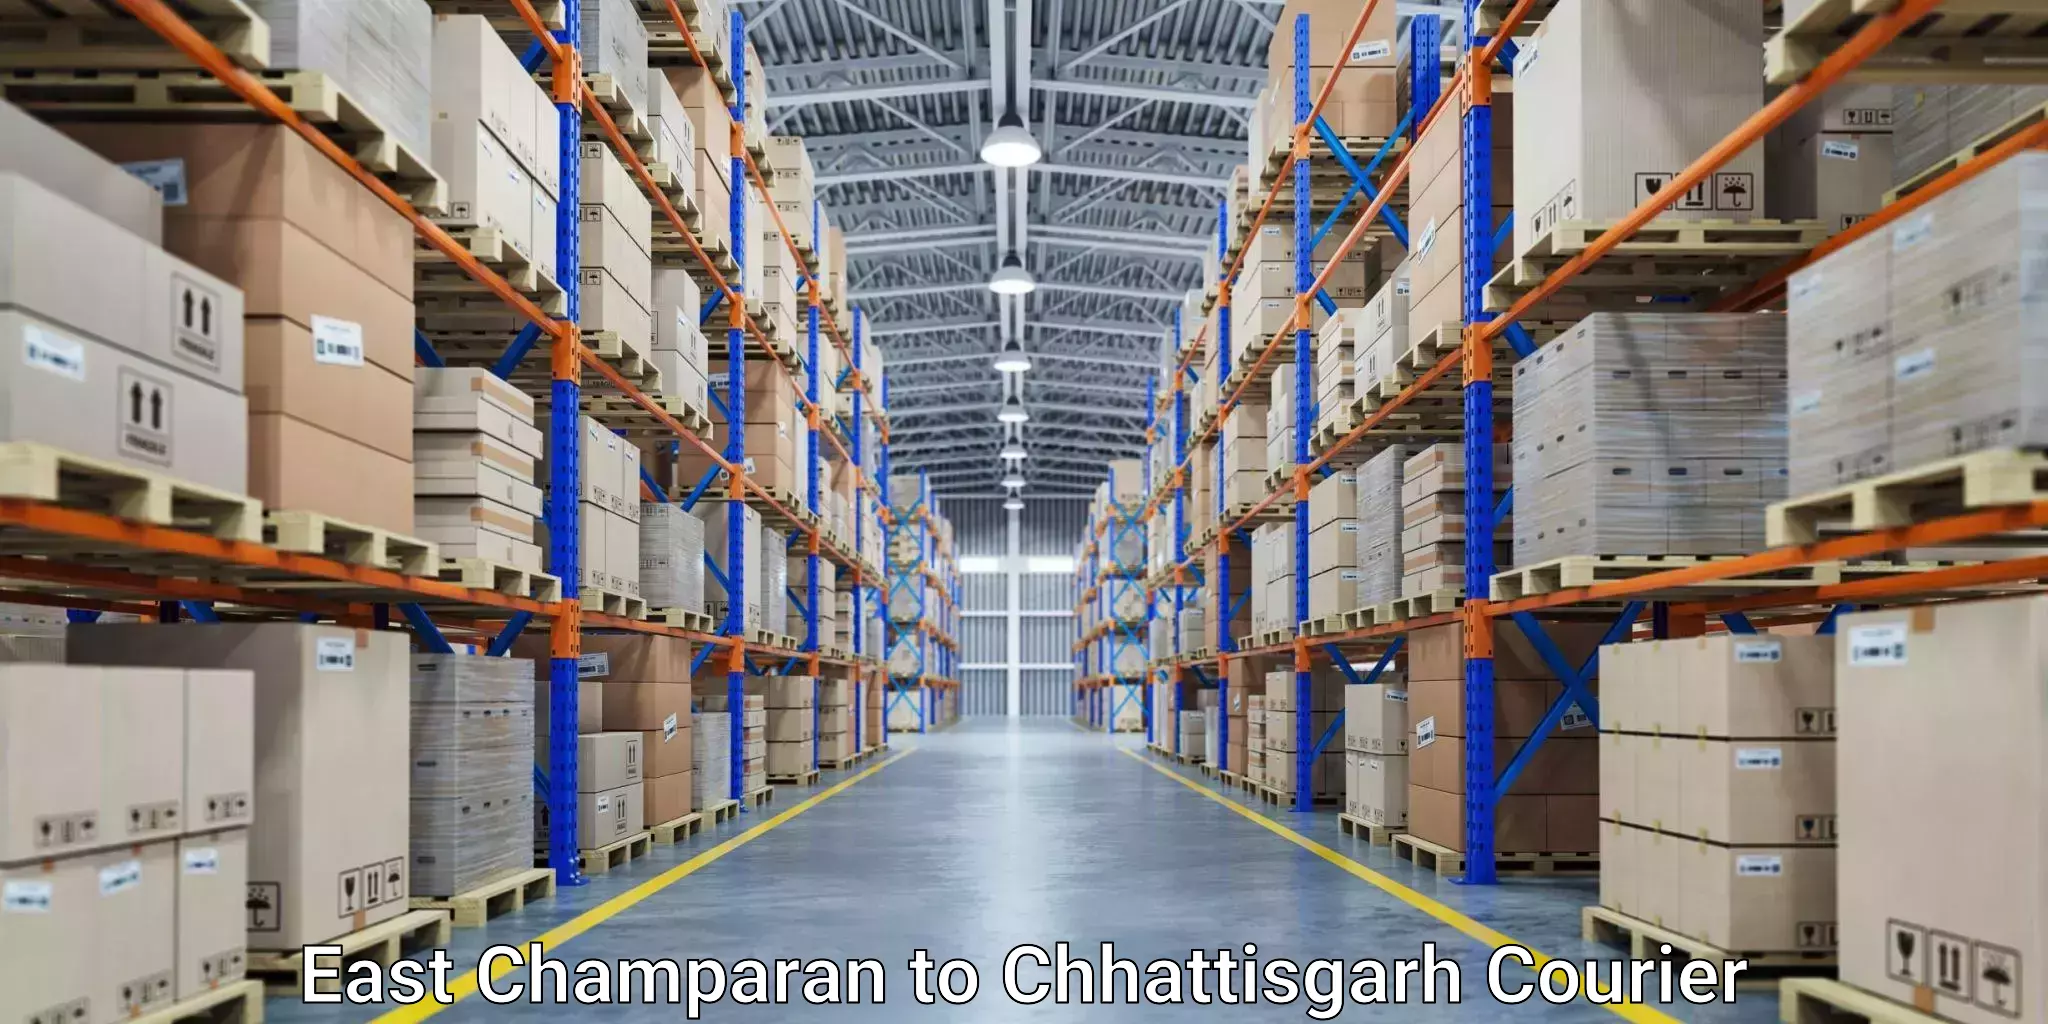 Cargo delivery service East Champaran to Dongargarh